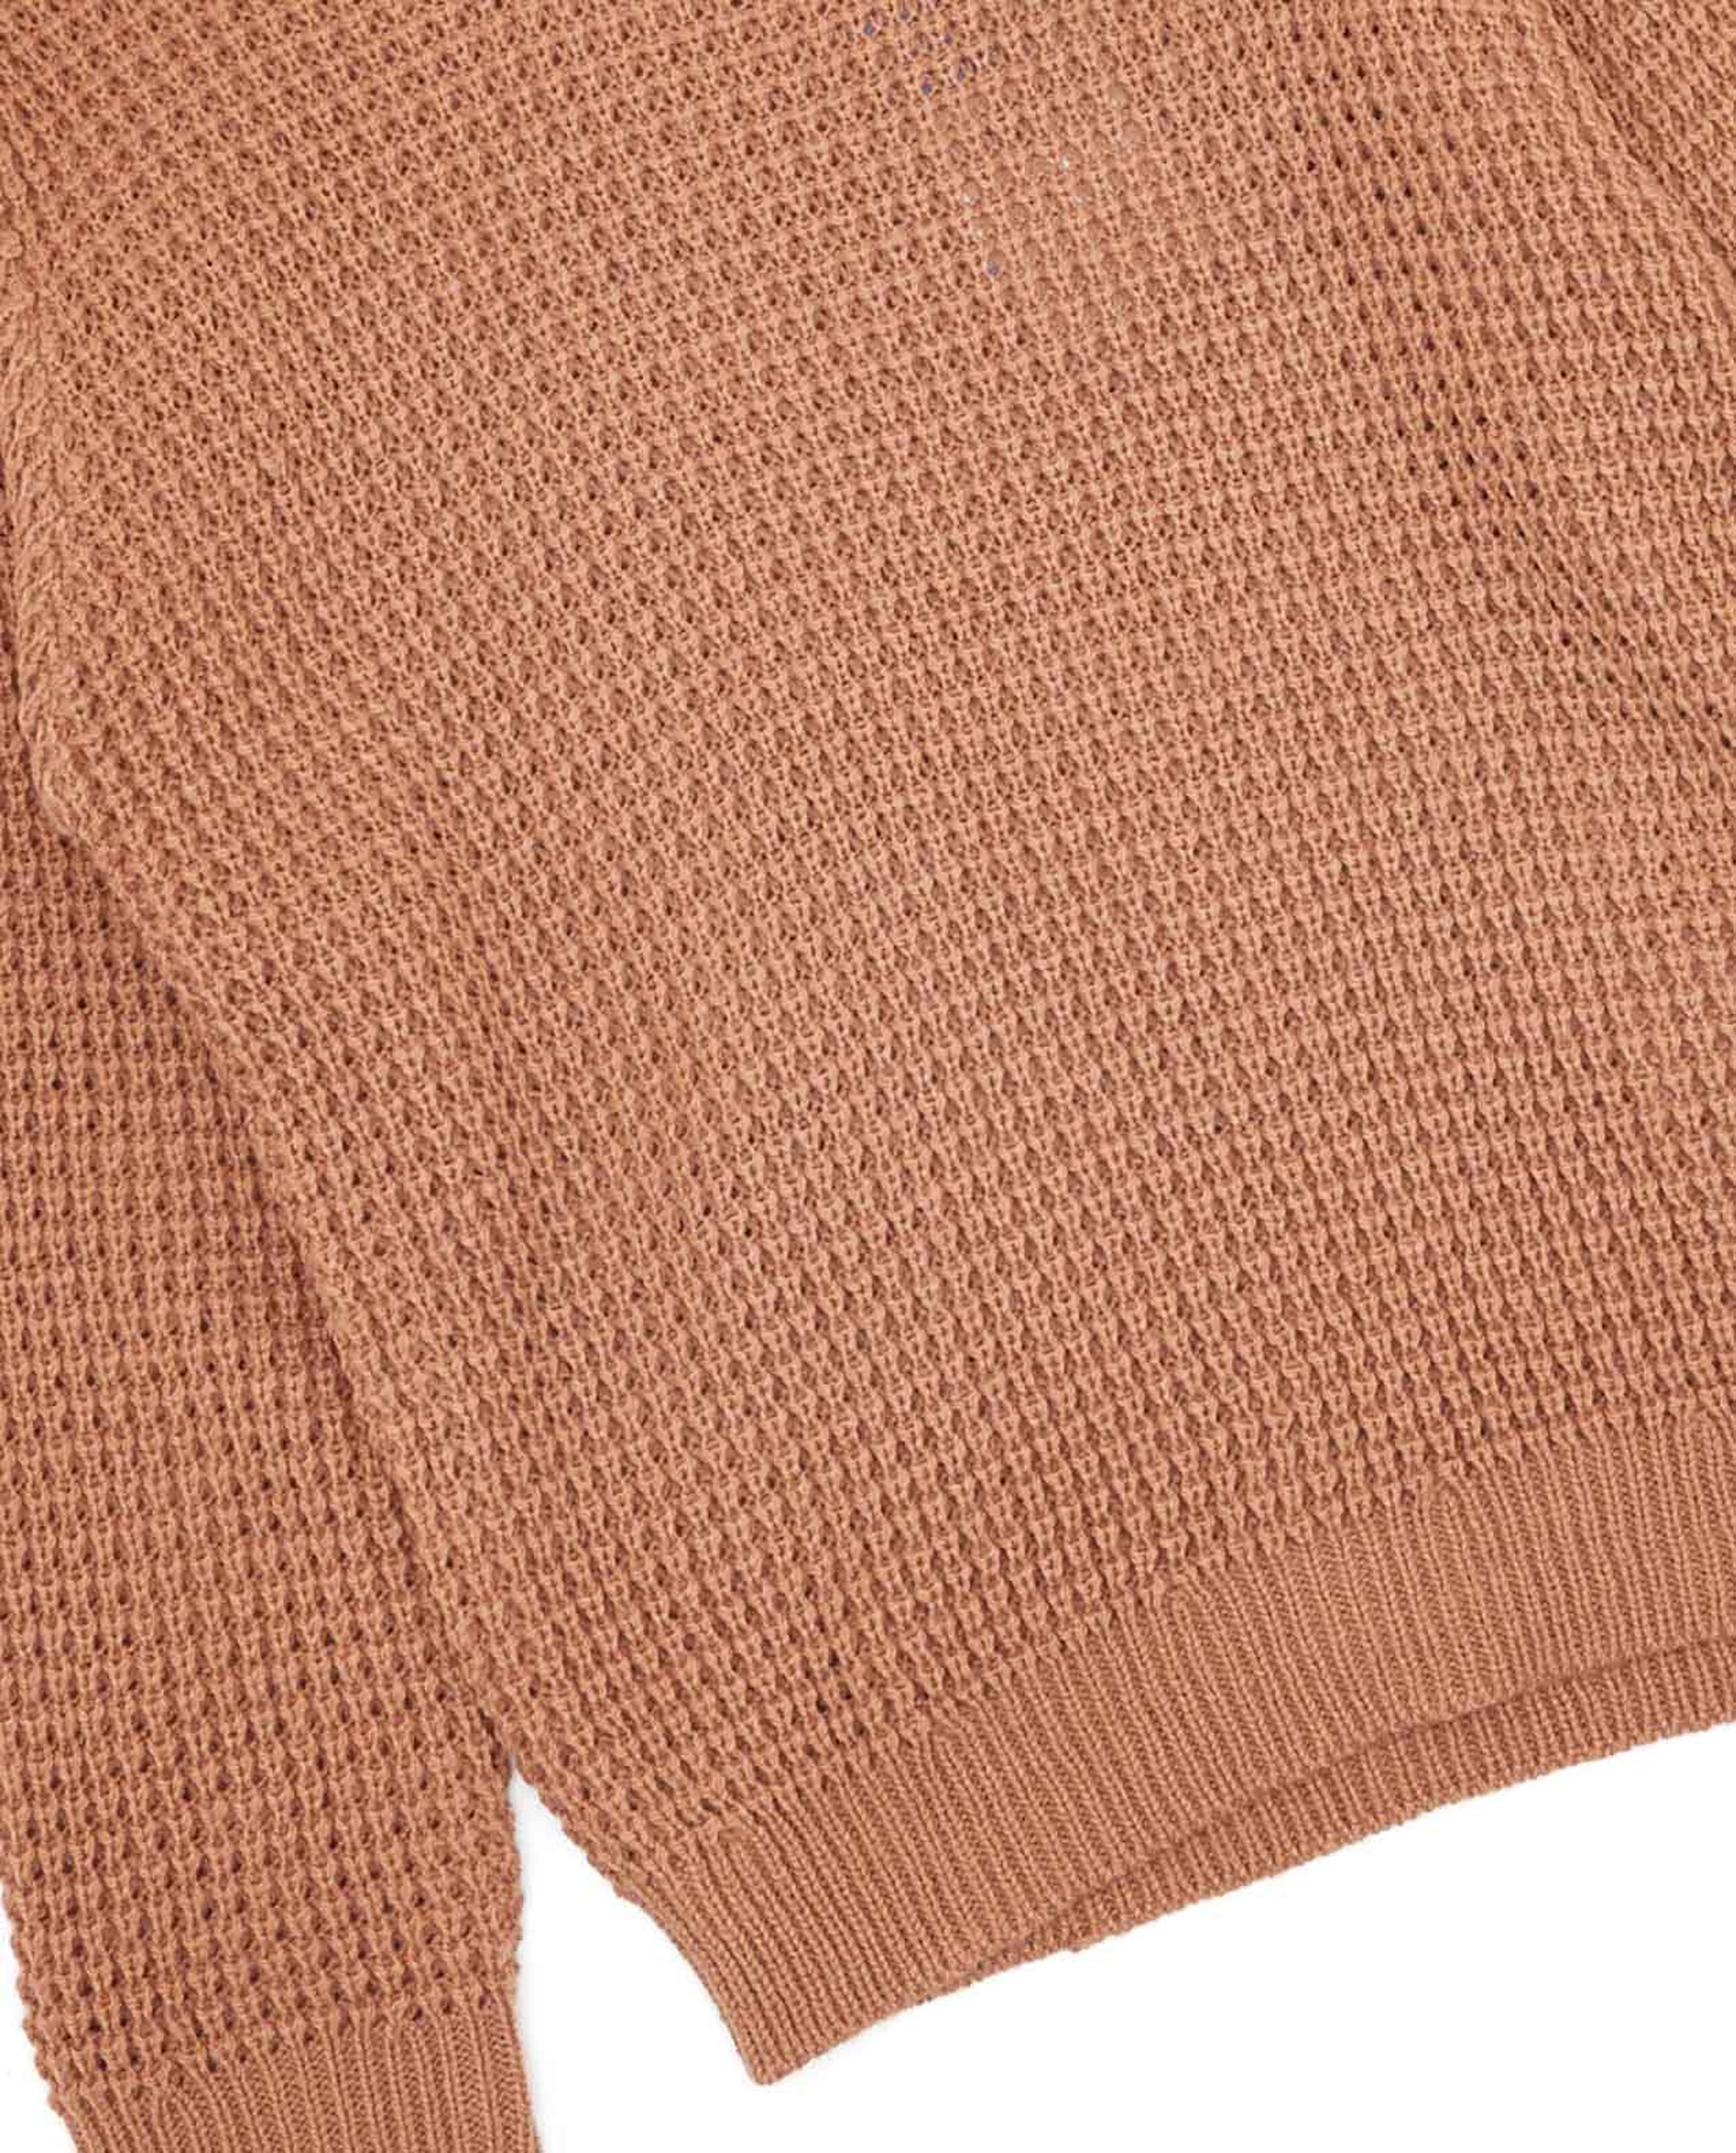 Waffle Textured Sweater with Long Sleeves